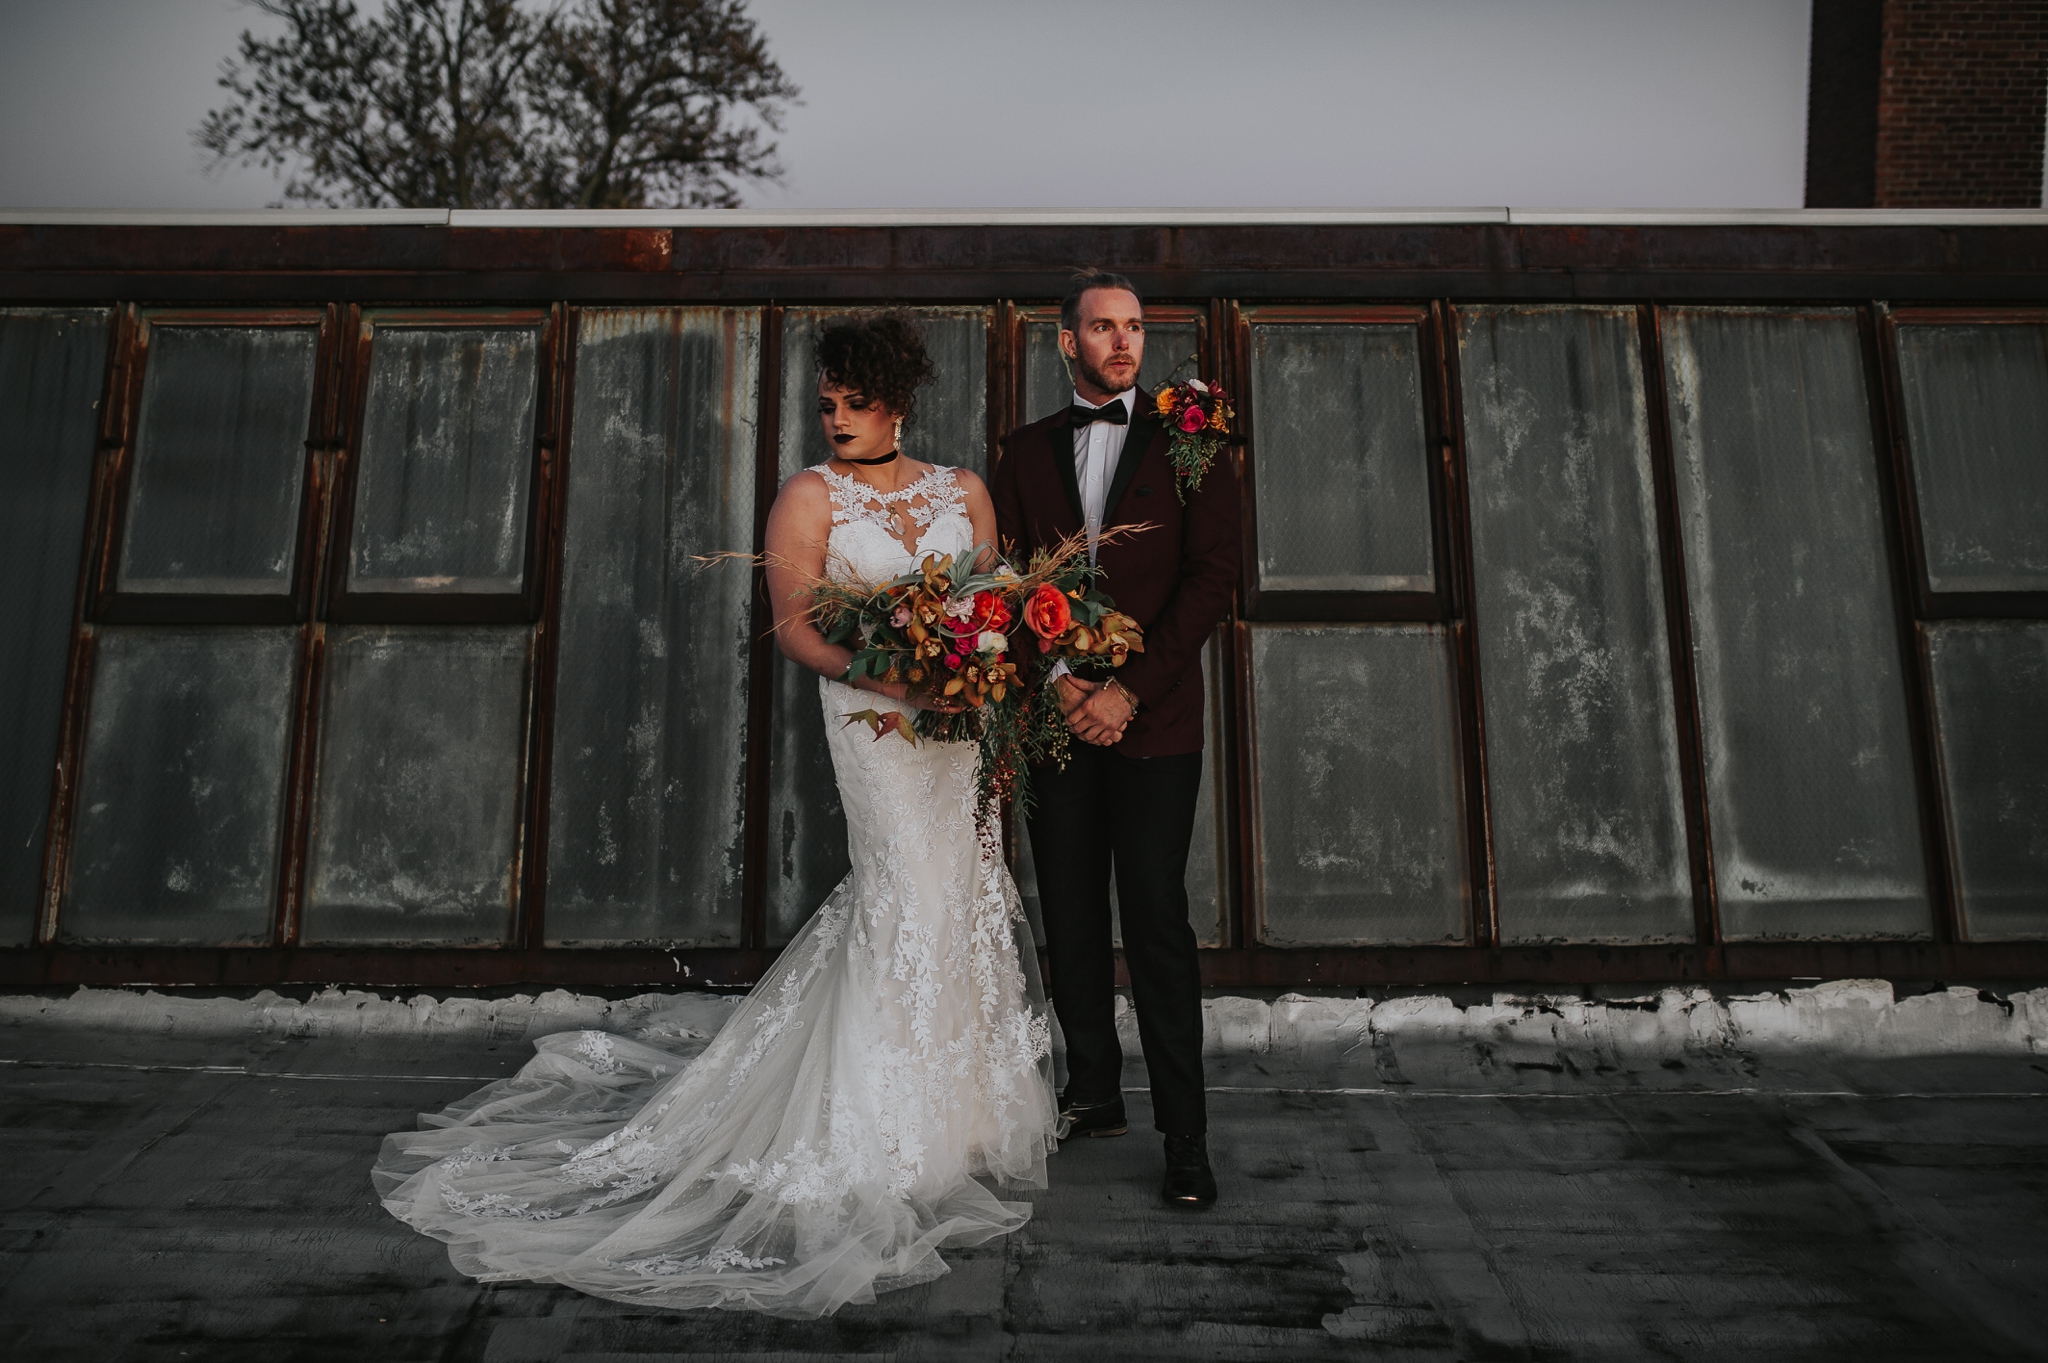 Power couple with Liliian West gown and JTGhamo maroon suit - Pearl Weddings & Events